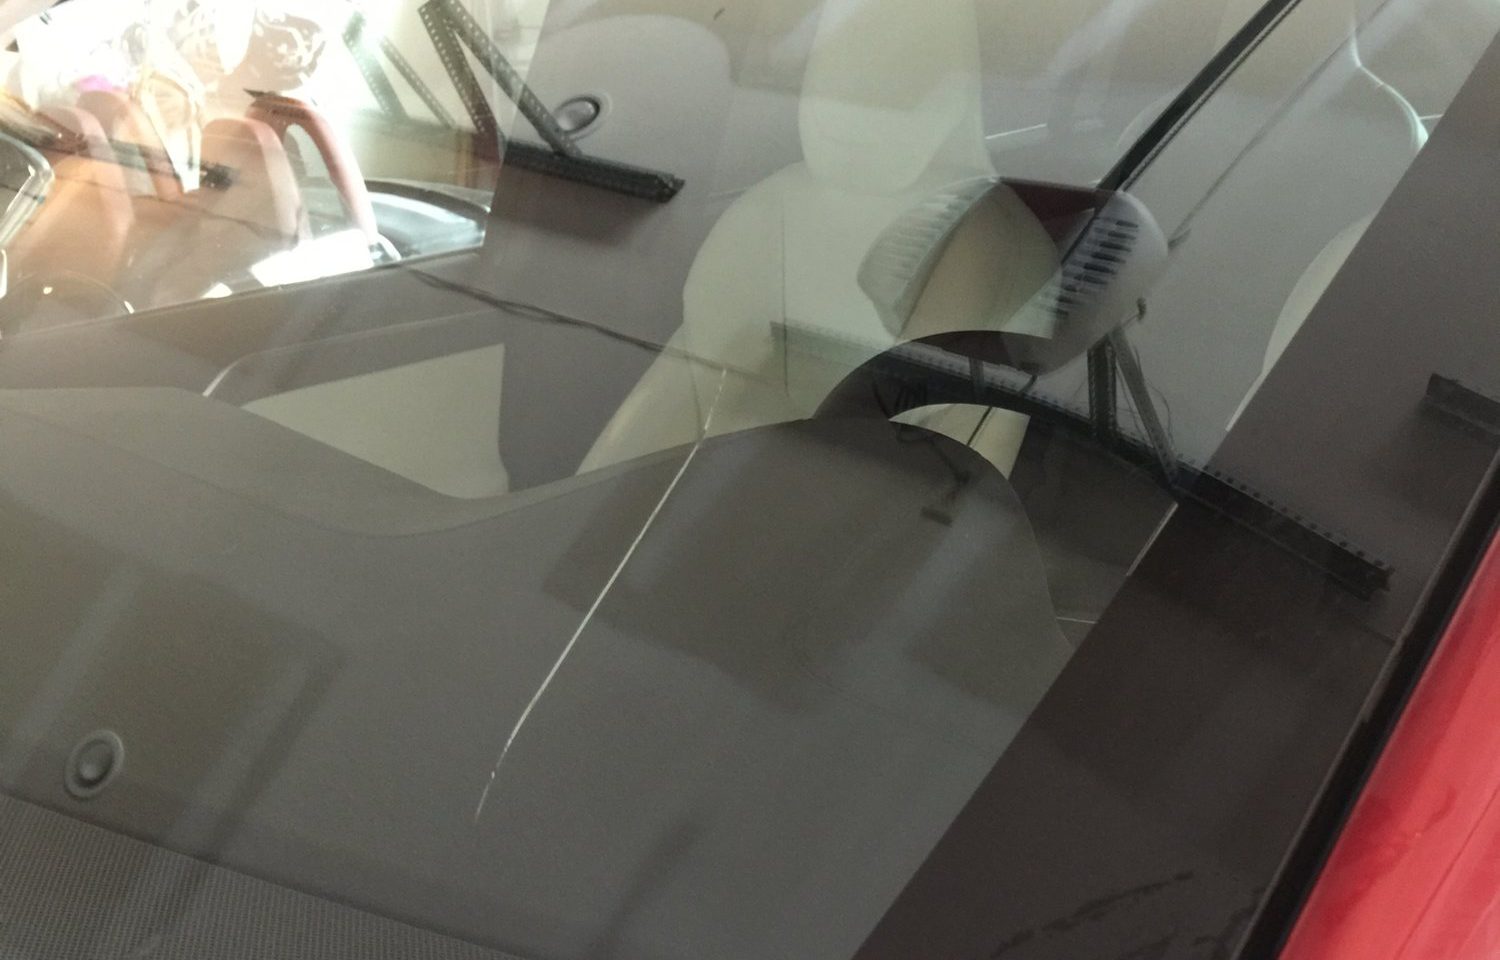 Tesla Model X's stunning panoramic windshield cost ~$2300 to replace